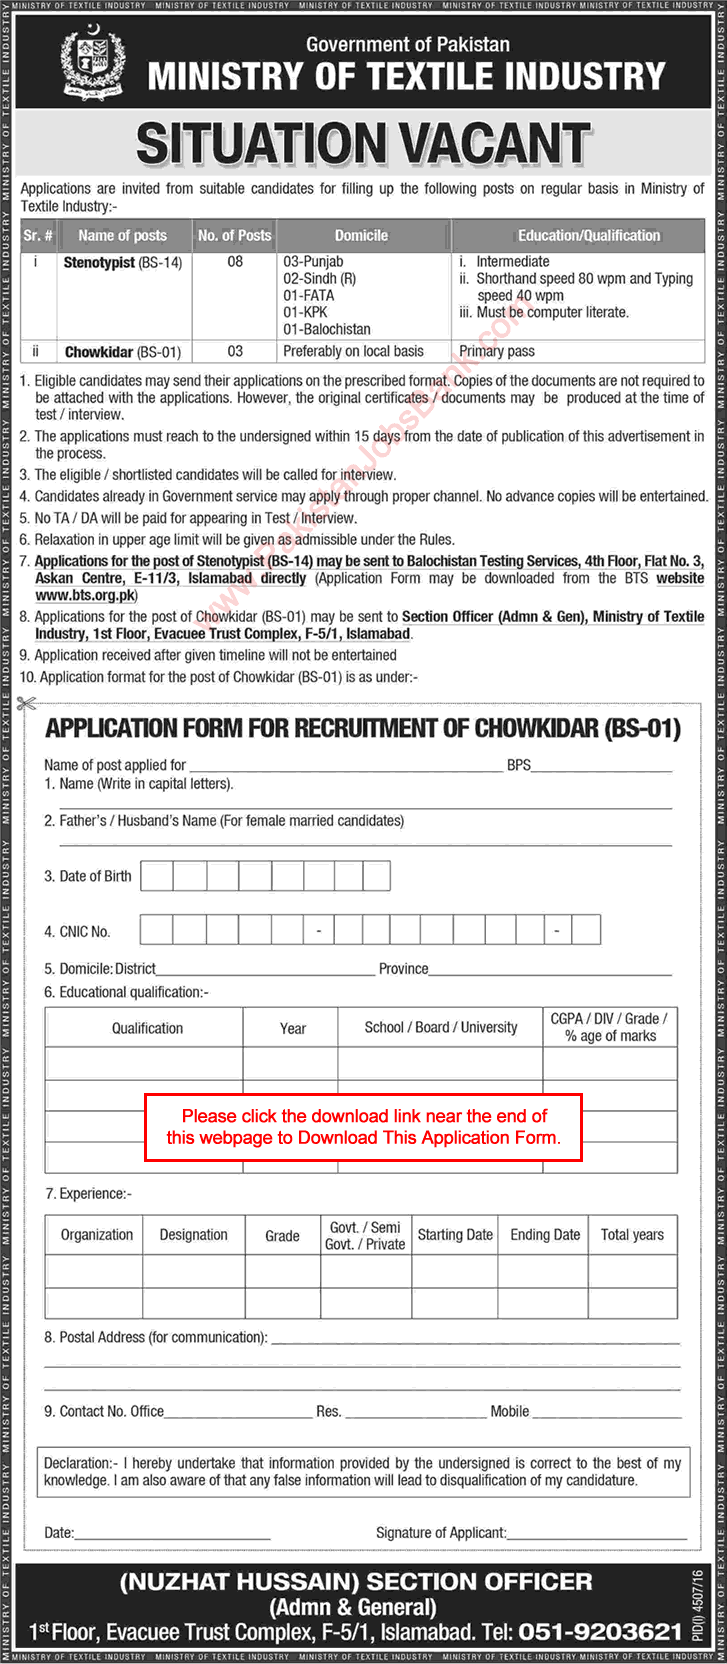 Ministry of Textile Industry Islamabad Jobs 2017 March Application Form Stenotypists & Chowkidar Latest